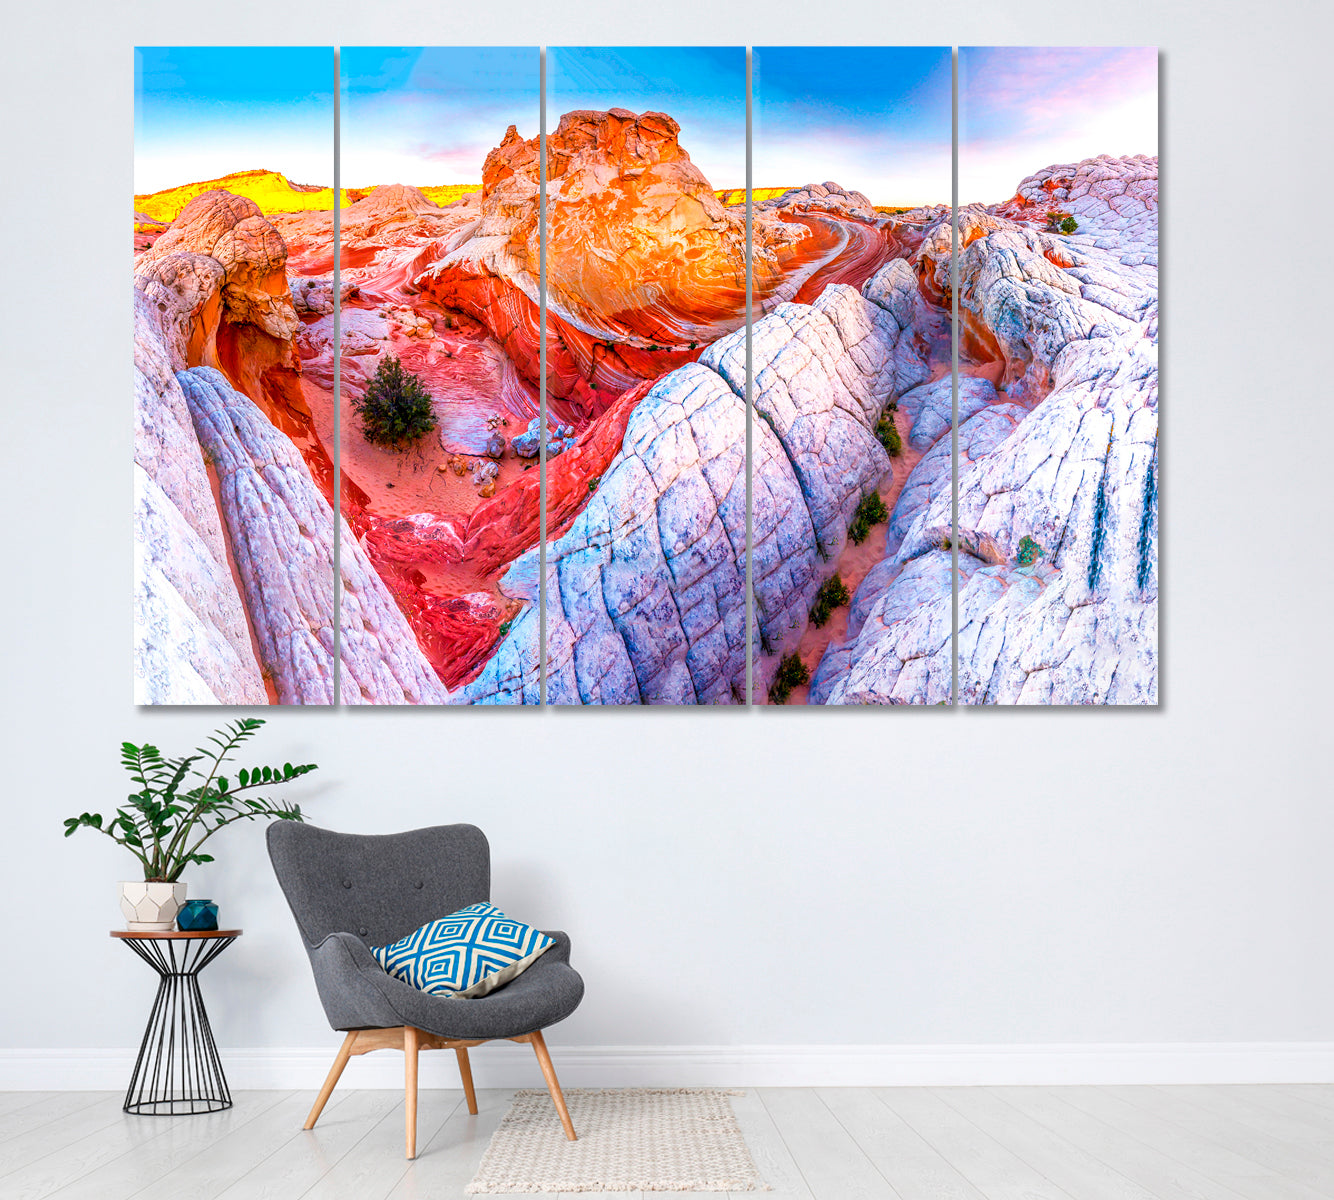 Red Rock Mountain Canyon Landscape Canvas Print ArtLexy 5 Panels 36"x24" inches 